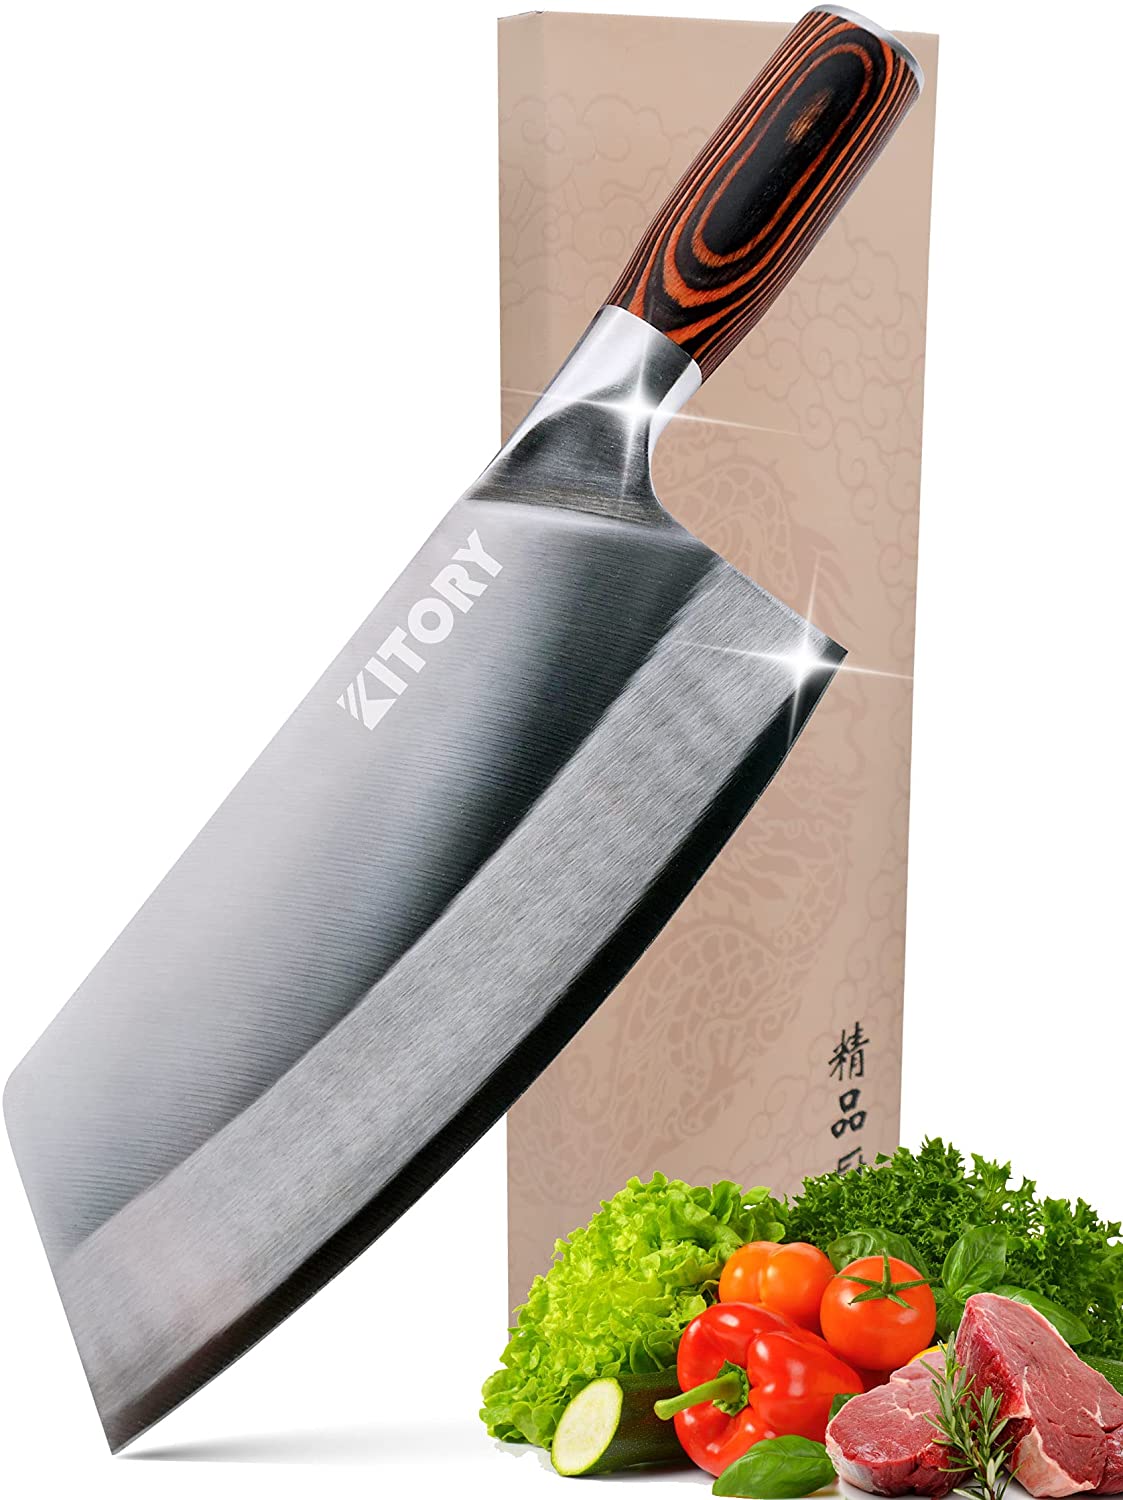 Kitory Chinese Vegetable and Meat Cleaver